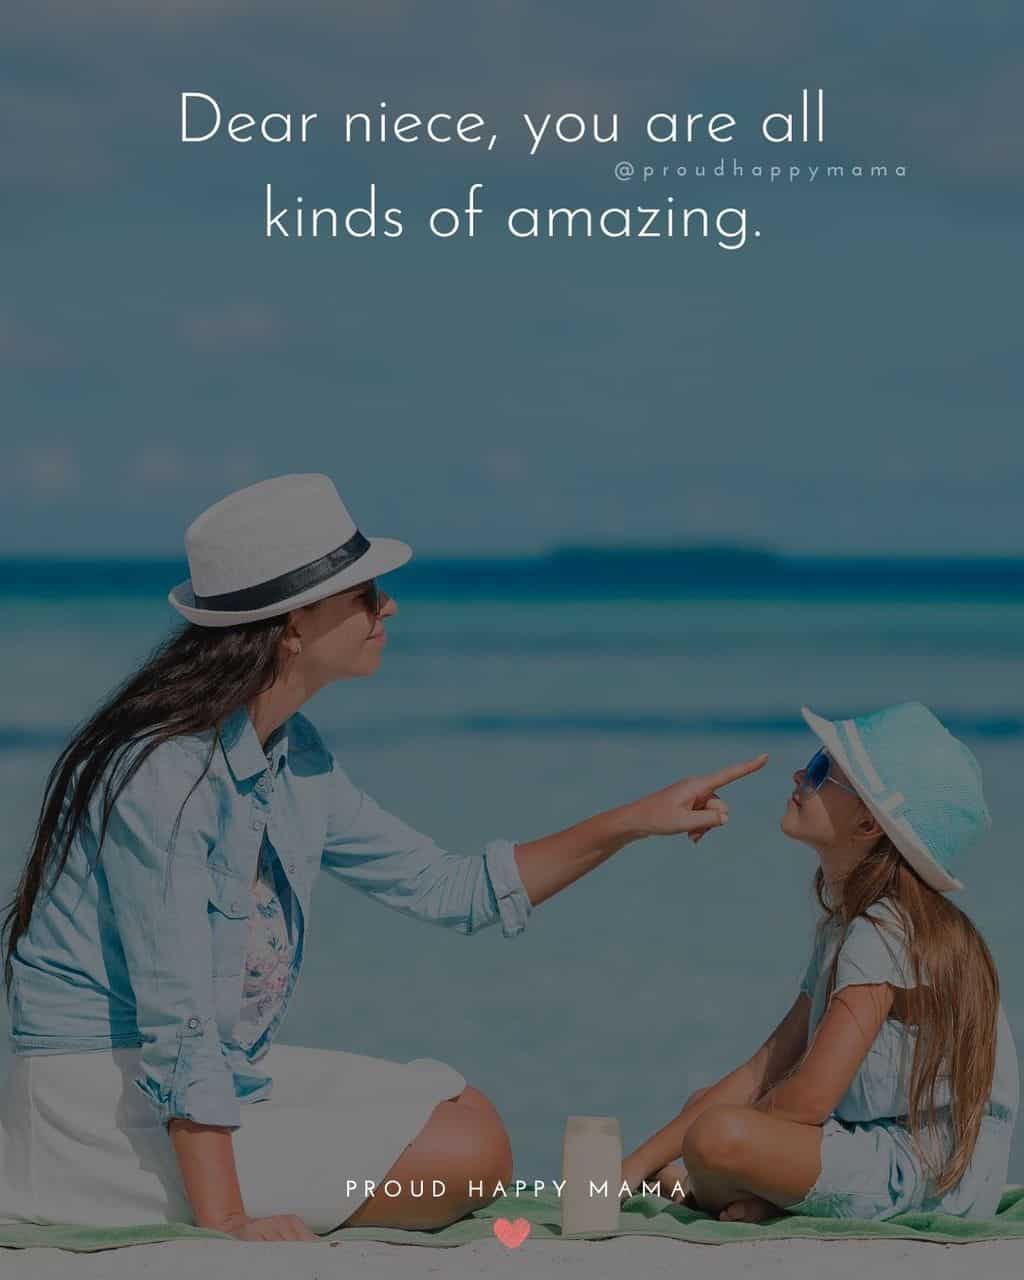 Niece Quotes - Dear niece, you are all kinds of amazing.